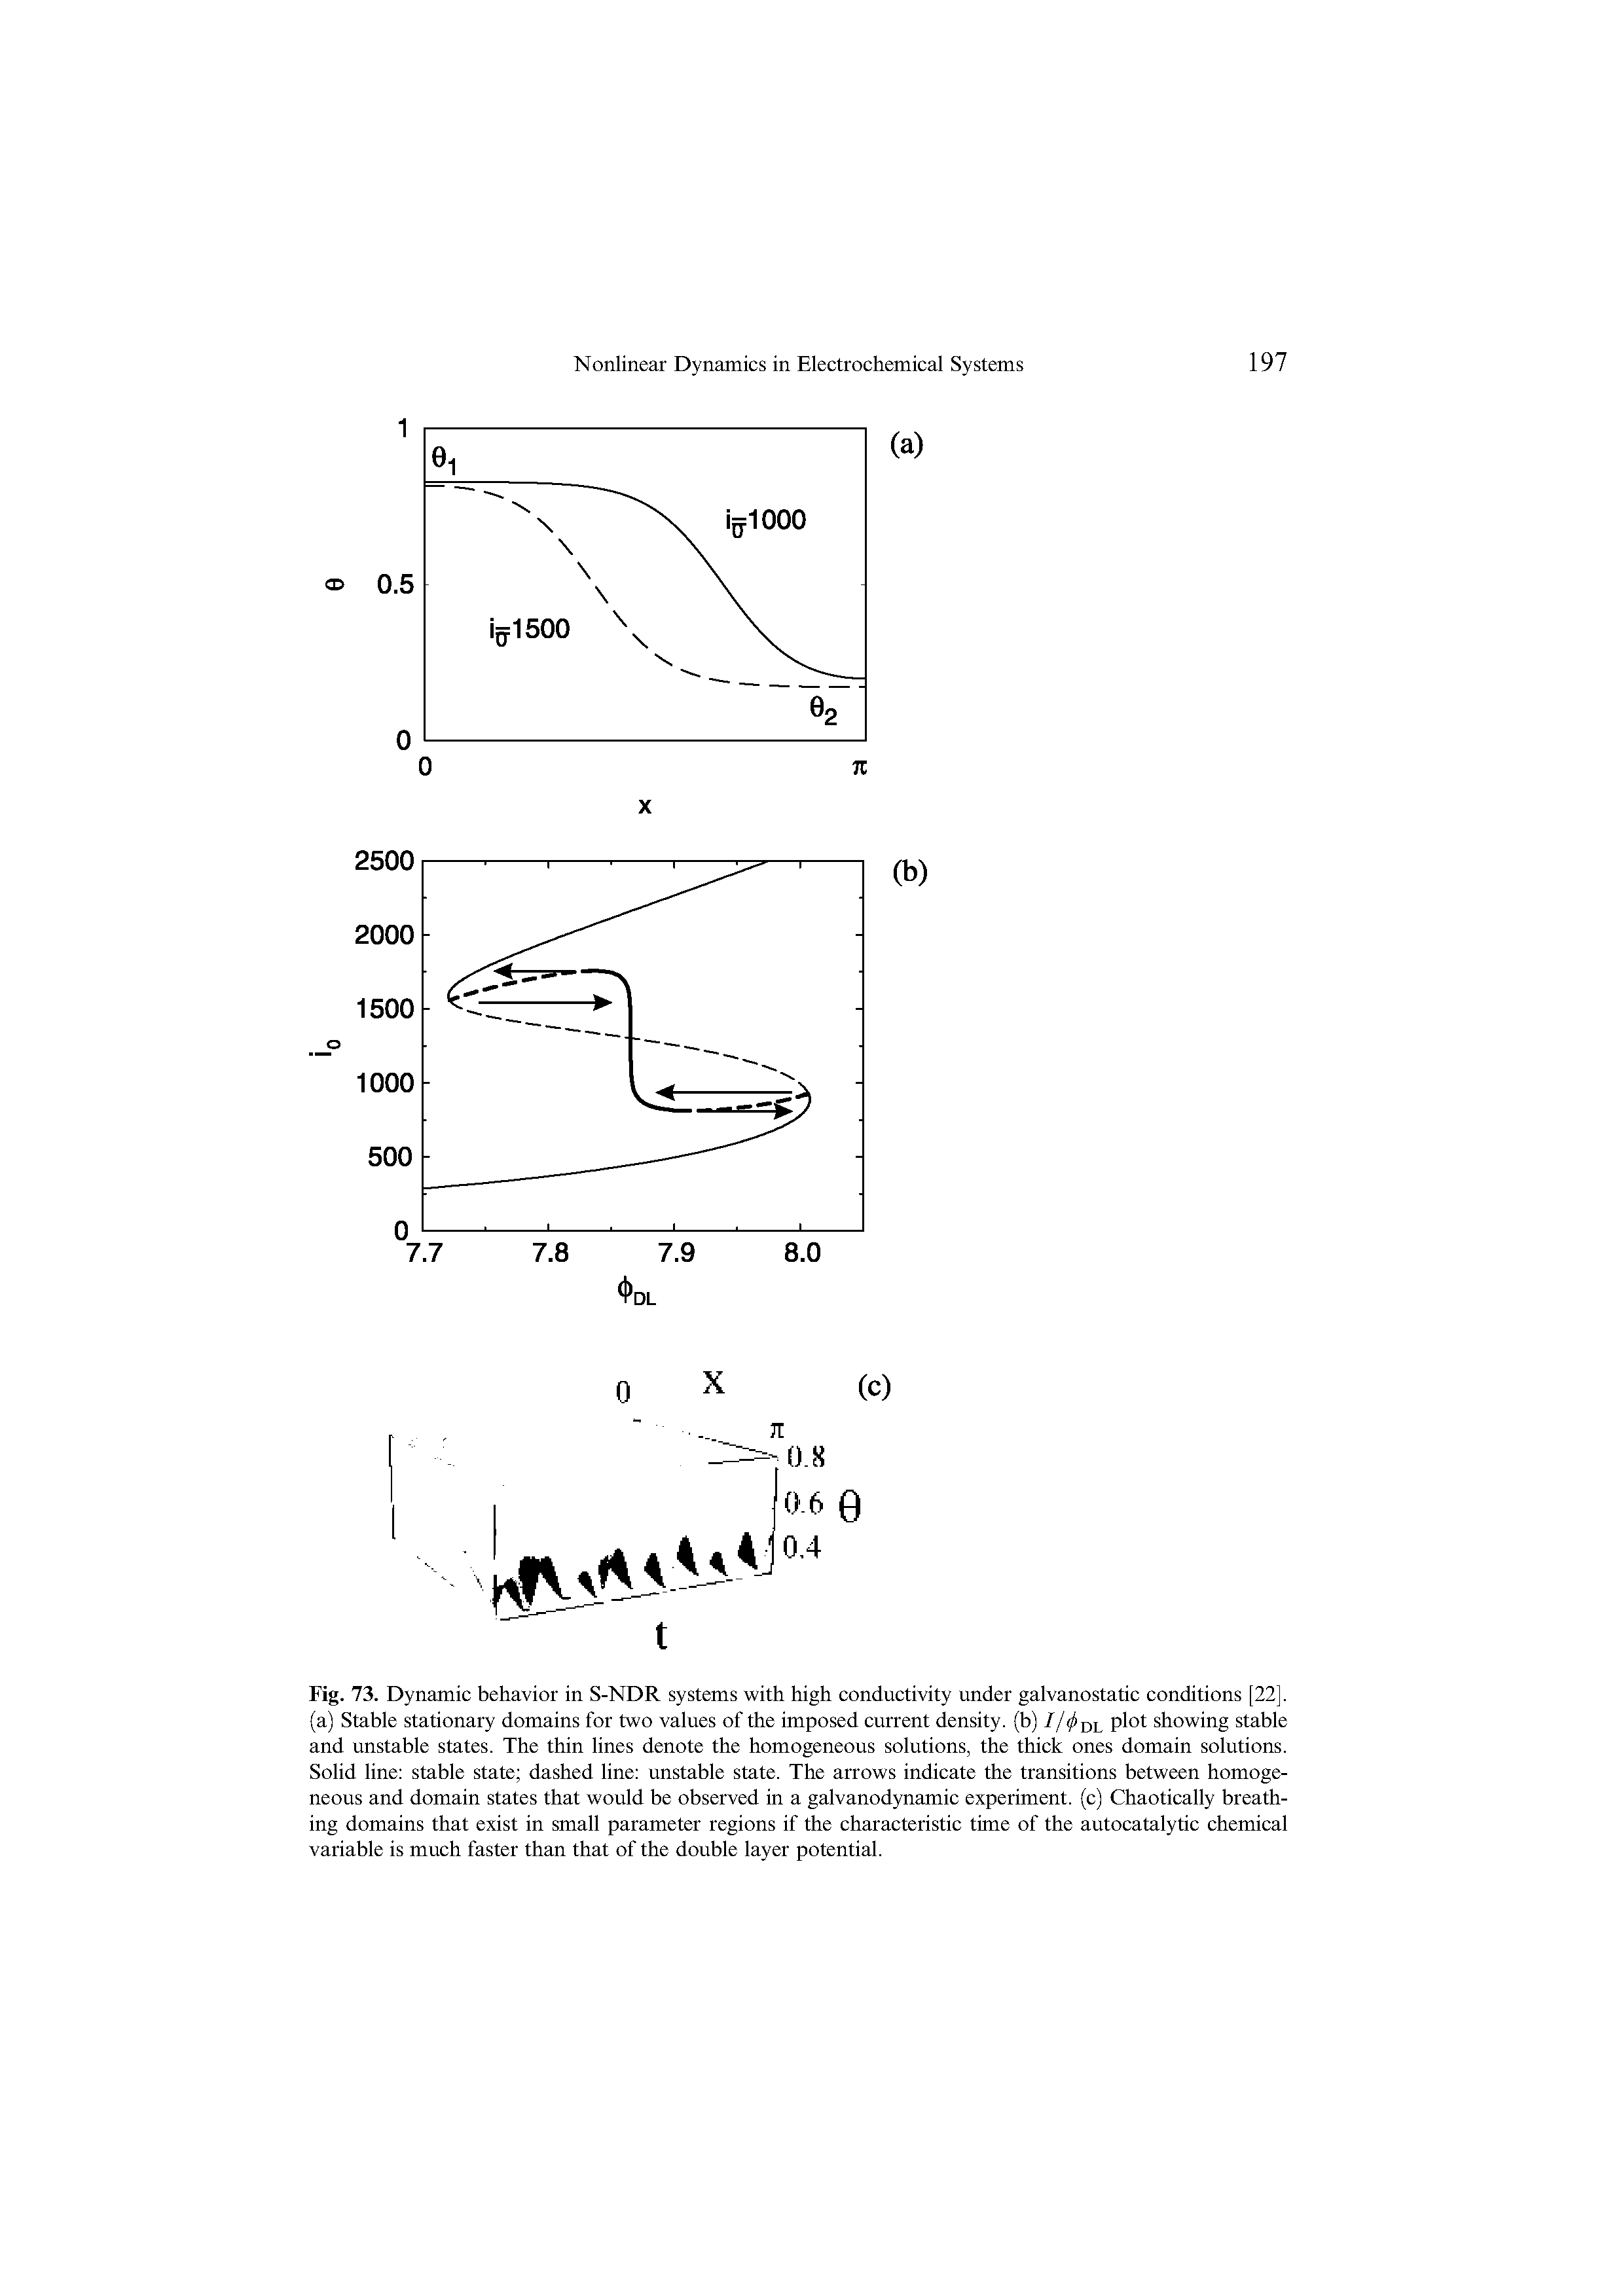 Fig. 73. Dynamic behavior in S-NDR systems with high conductivity under galvanostatic conditions [22]. (a) Stable stationary domains for two values of the imposed current density, (b) 7/(4 DL plot showing stable and unstable states. The thin lines denote the homogeneous solutions, the thick ones domain solutions. Solid line stable state dashed line unstable state. The arrows indicate the transitions between homogeneous and domain states that would be observed in a galvanodynamic experiment, (c) Chaotically breathing domains that exist in small parameter regions if the characteristic time of the autocatalytic chemical variable is much faster than that of the double layer potential.